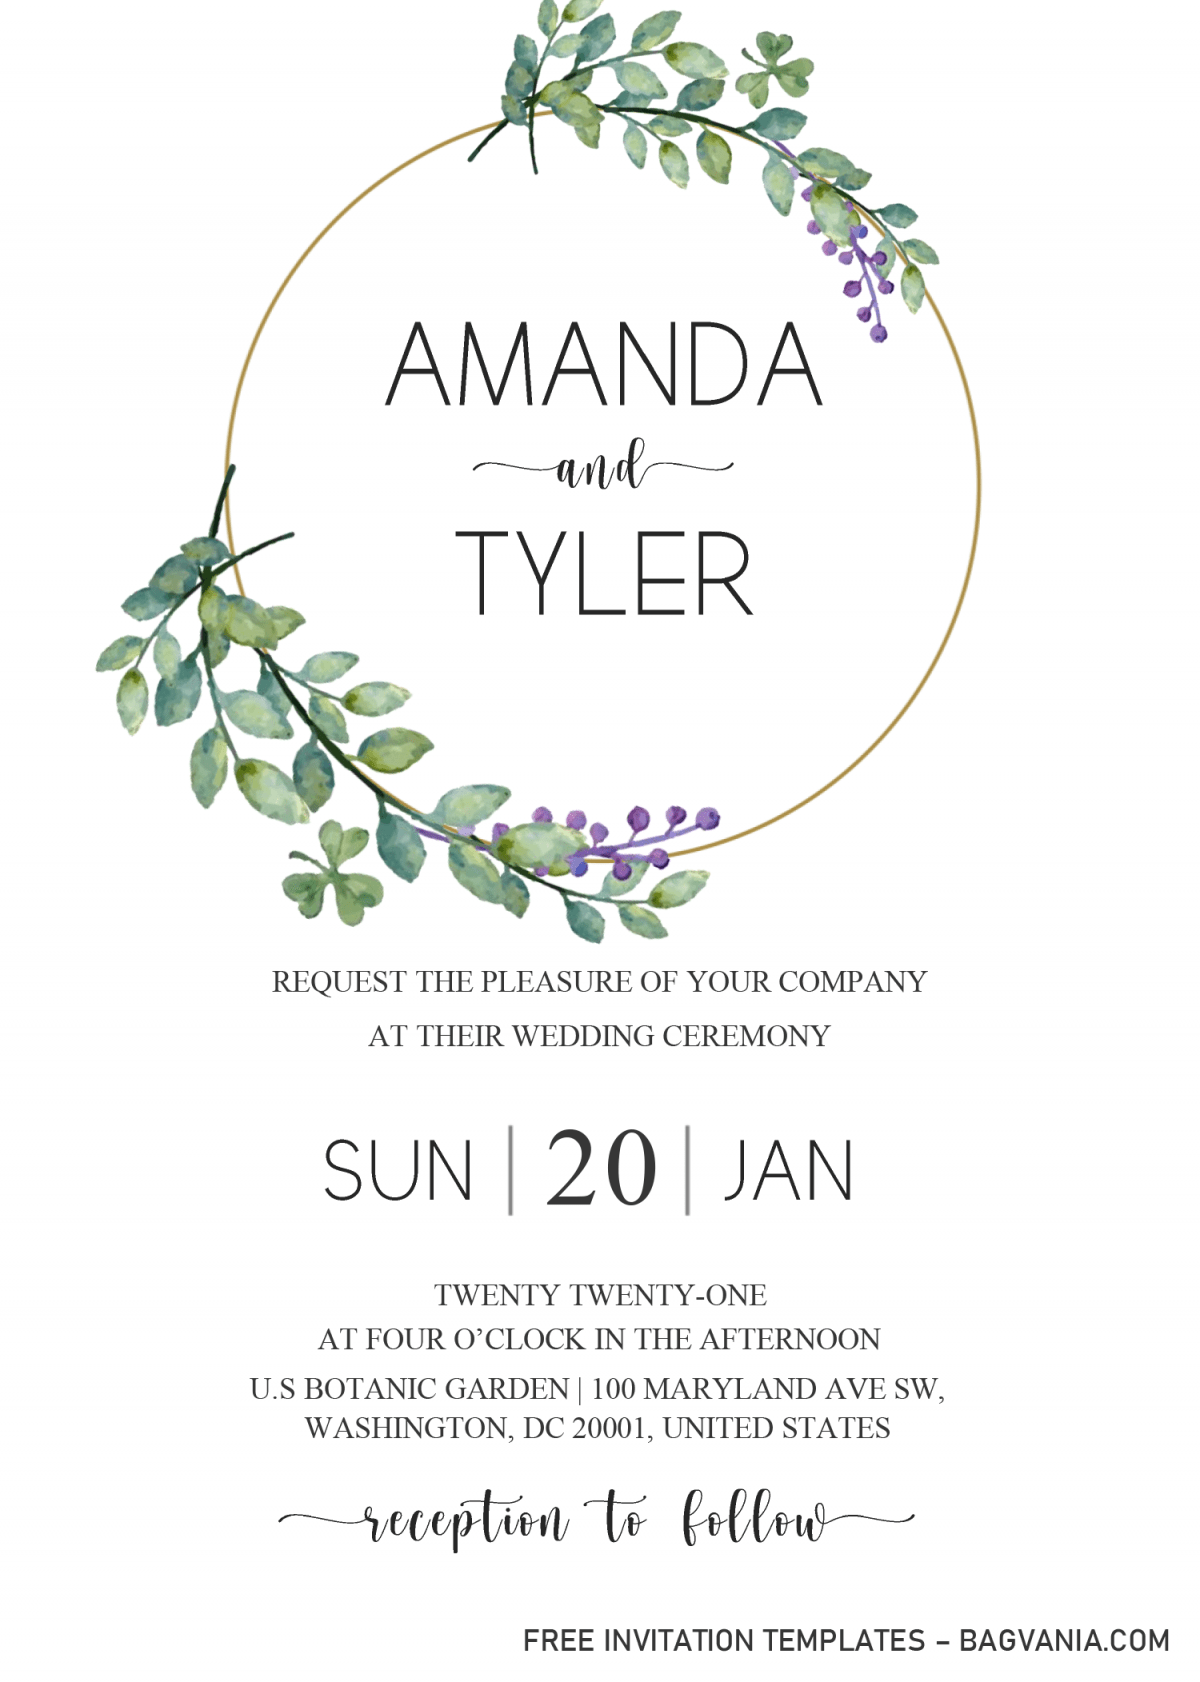 Floral Wreath Invitation Templates - Editable .Docx and has gold frame